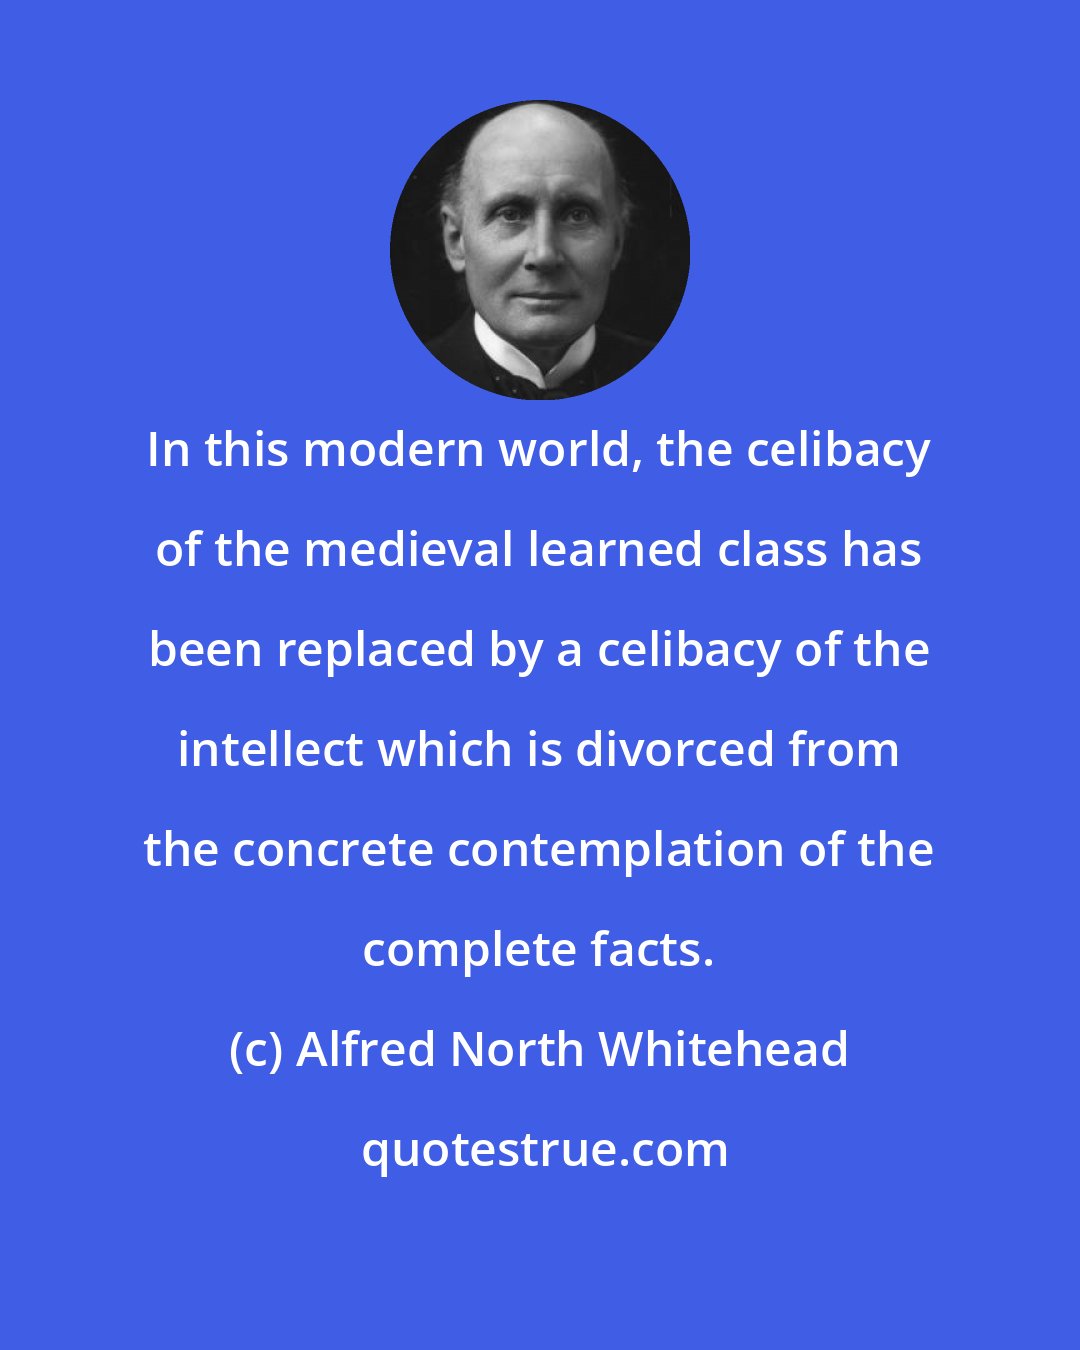 Alfred North Whitehead: In this modern world, the celibacy of the medieval learned class has been replaced by a celibacy of the intellect which is divorced from the concrete contemplation of the complete facts.